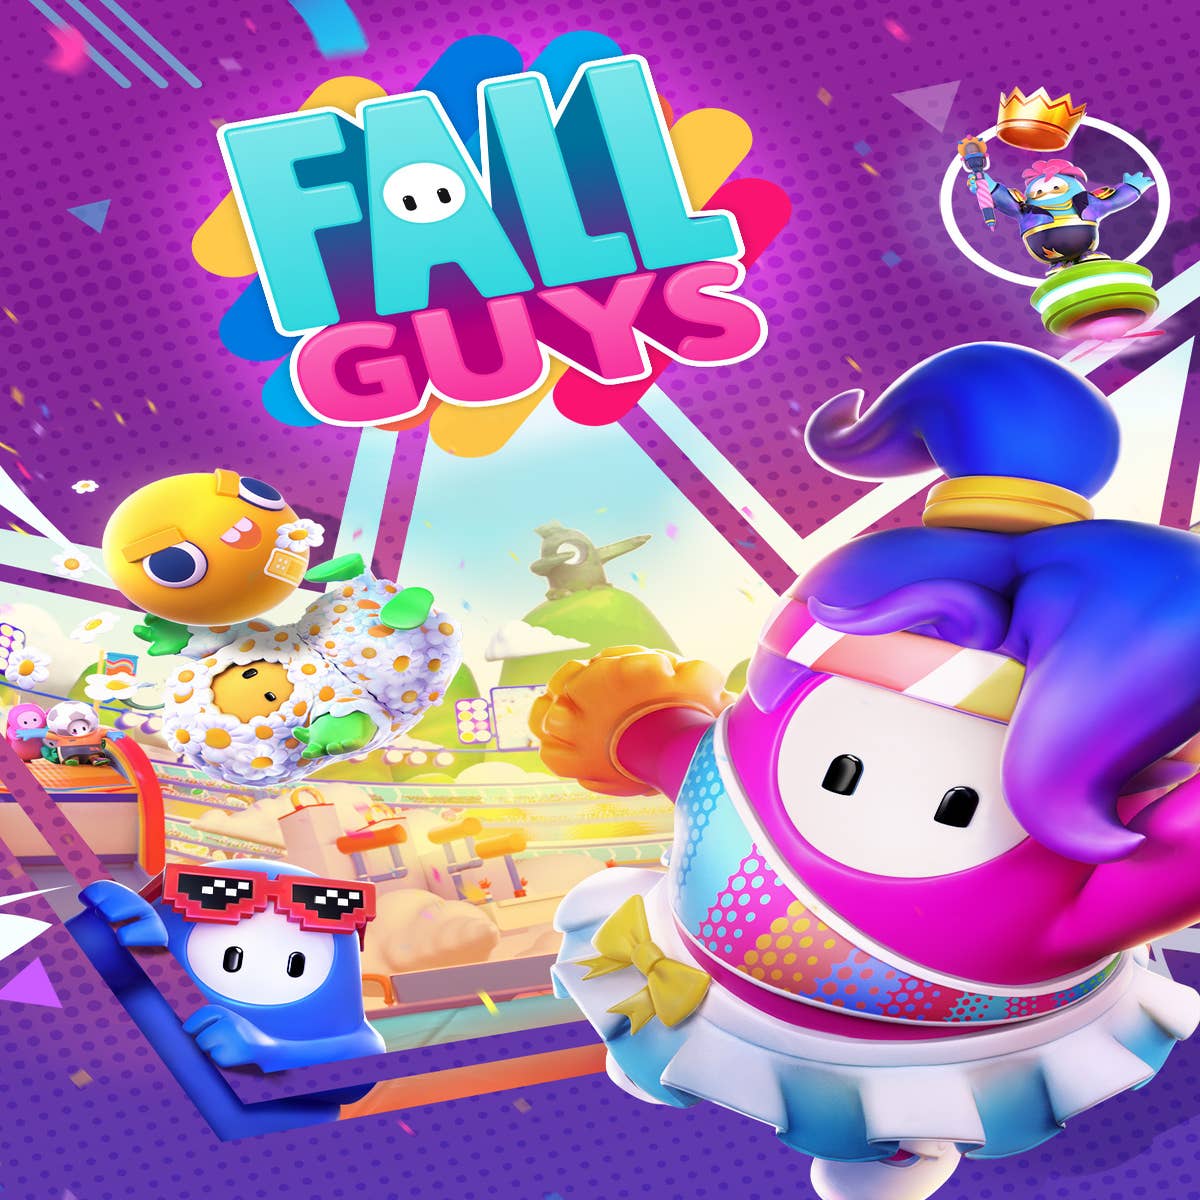 Fall Guys update fixes PS5 crossplay and bean animations on Switch